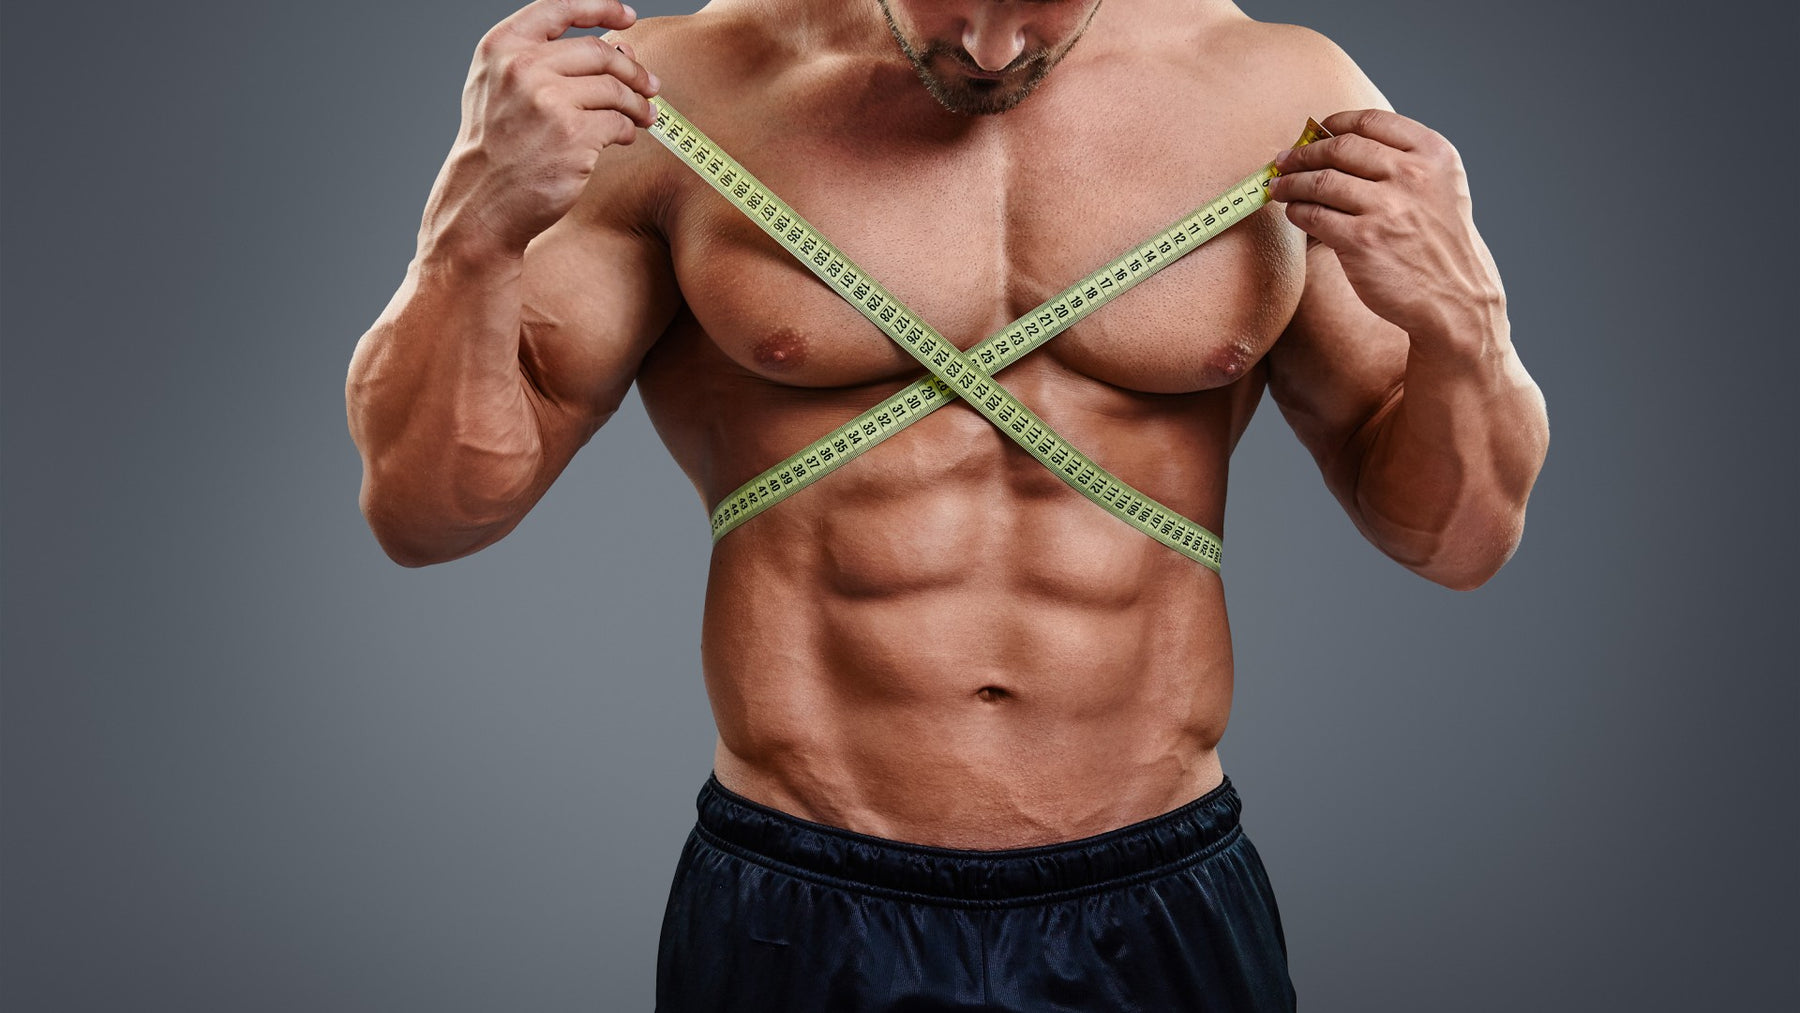 The Only 4 Fat Loss Hacks You Need to Worry About